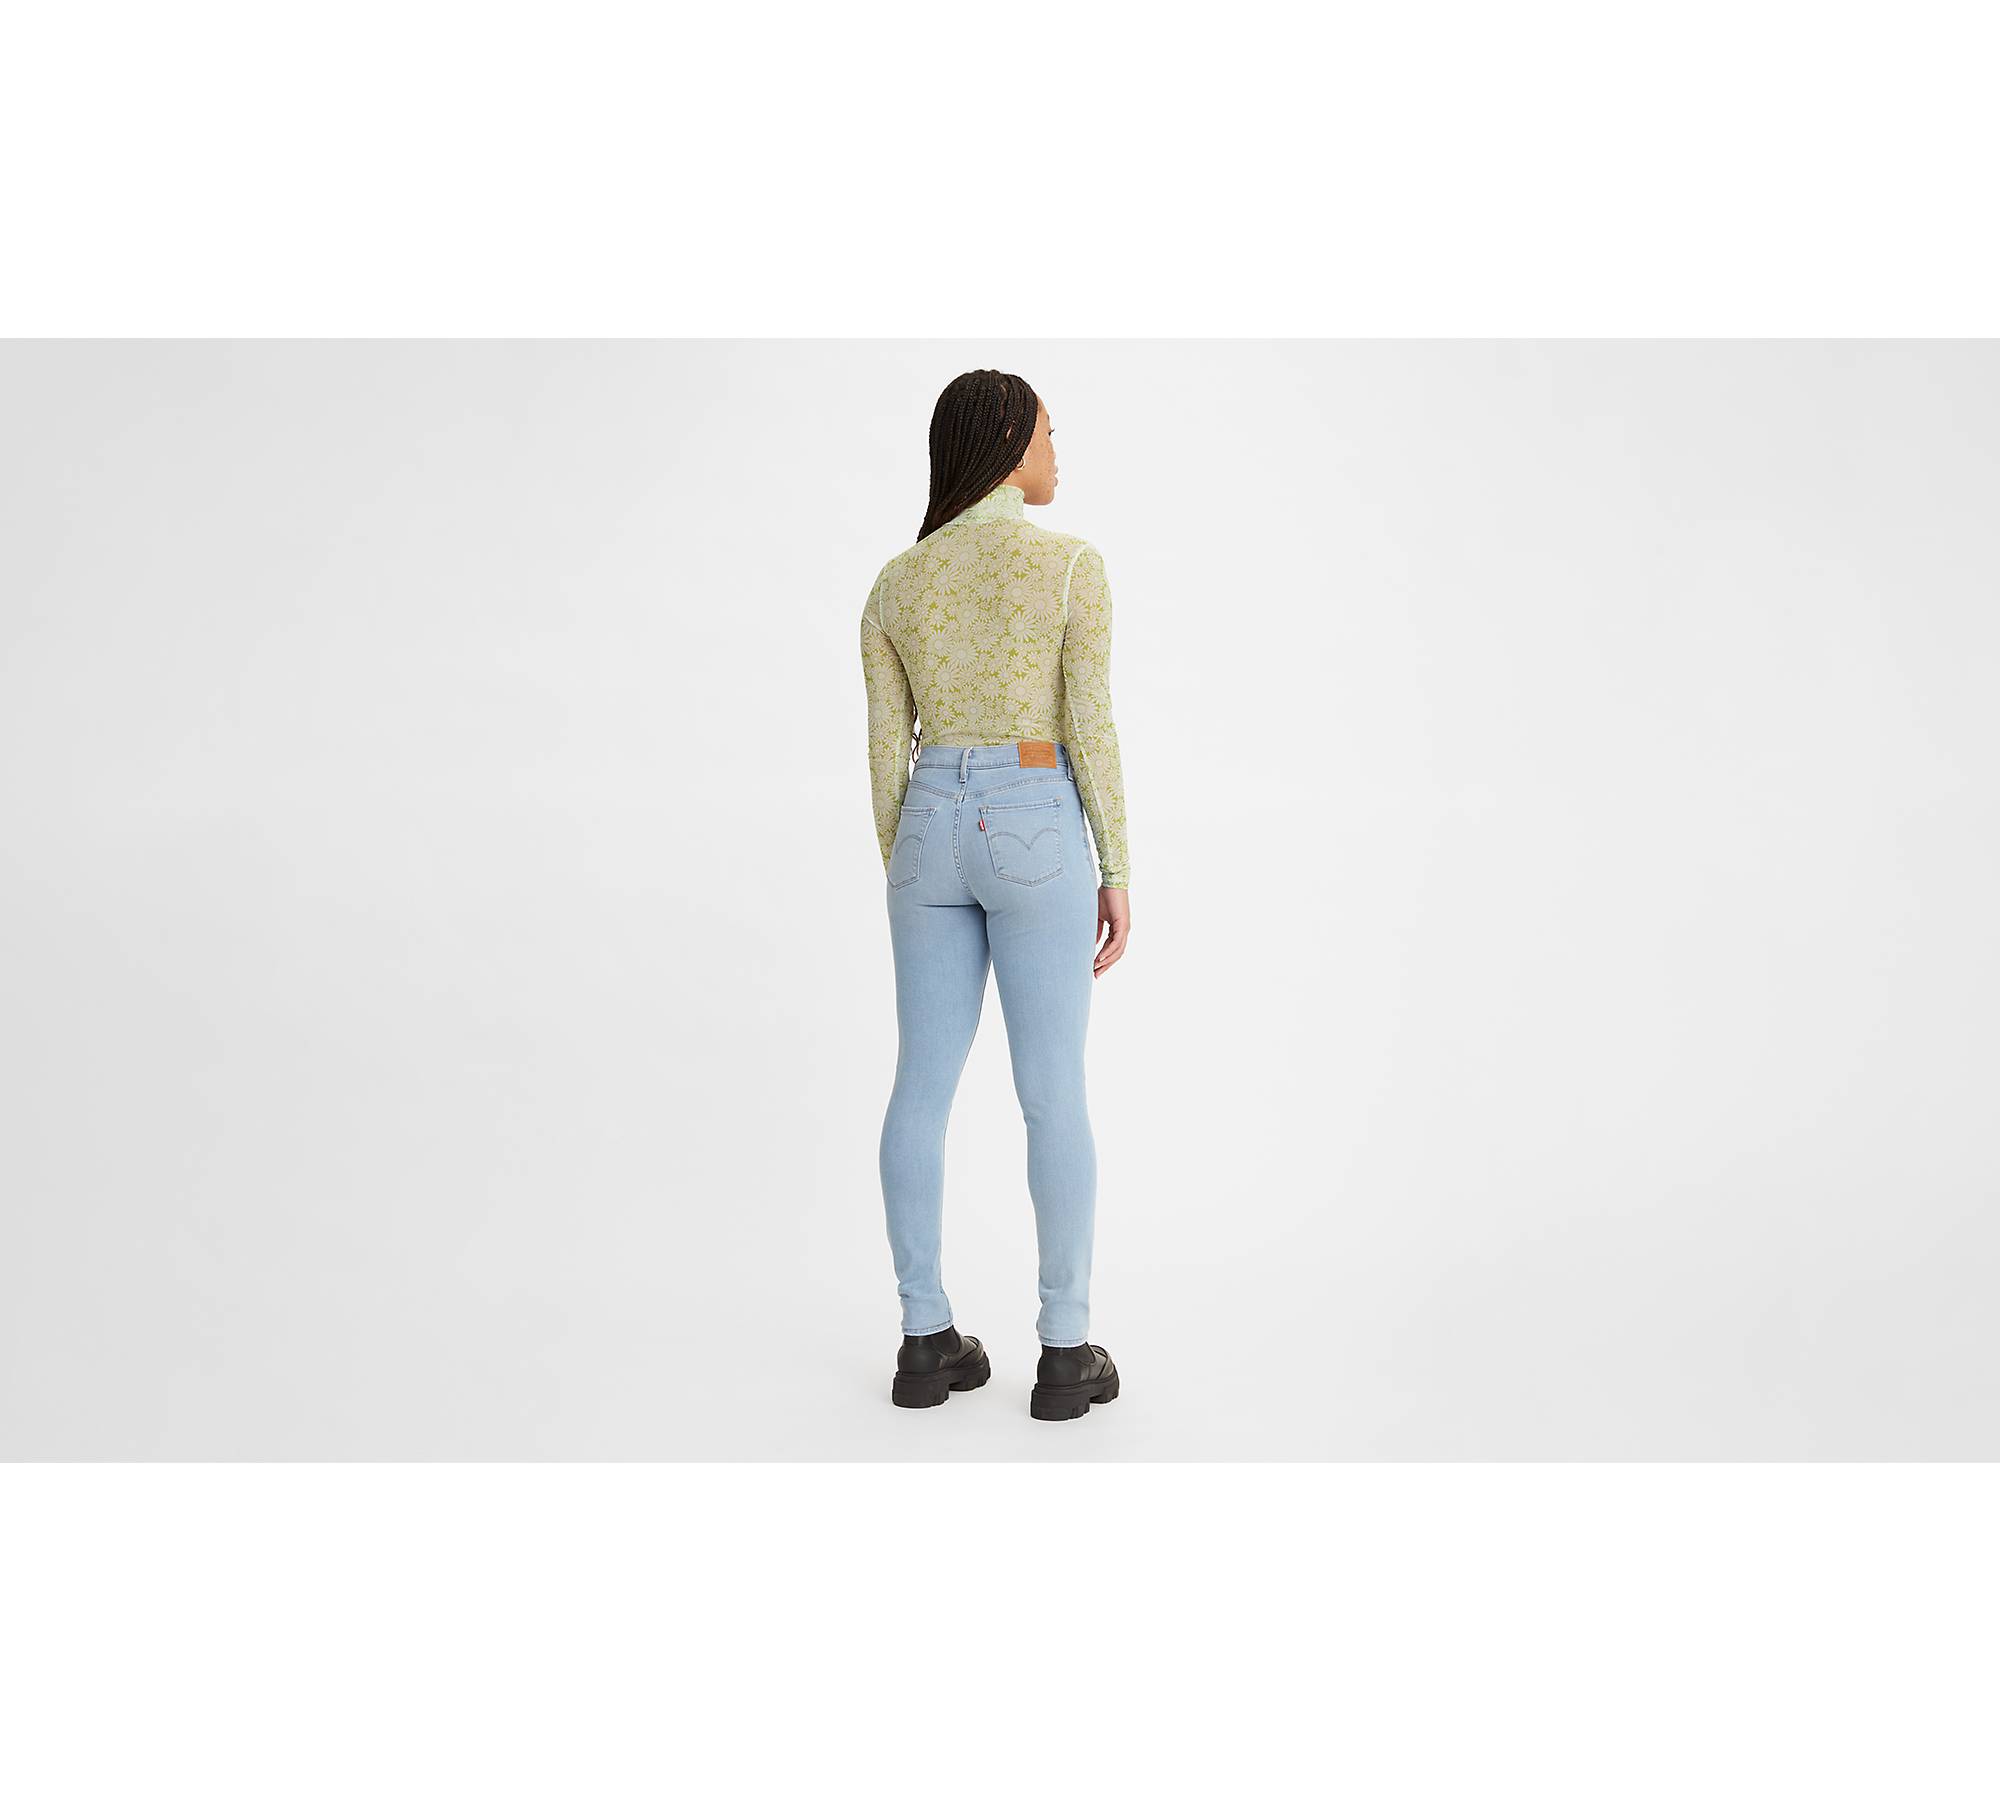 Levi's Shaping Skinny Jeans for Women - Up to 50% off